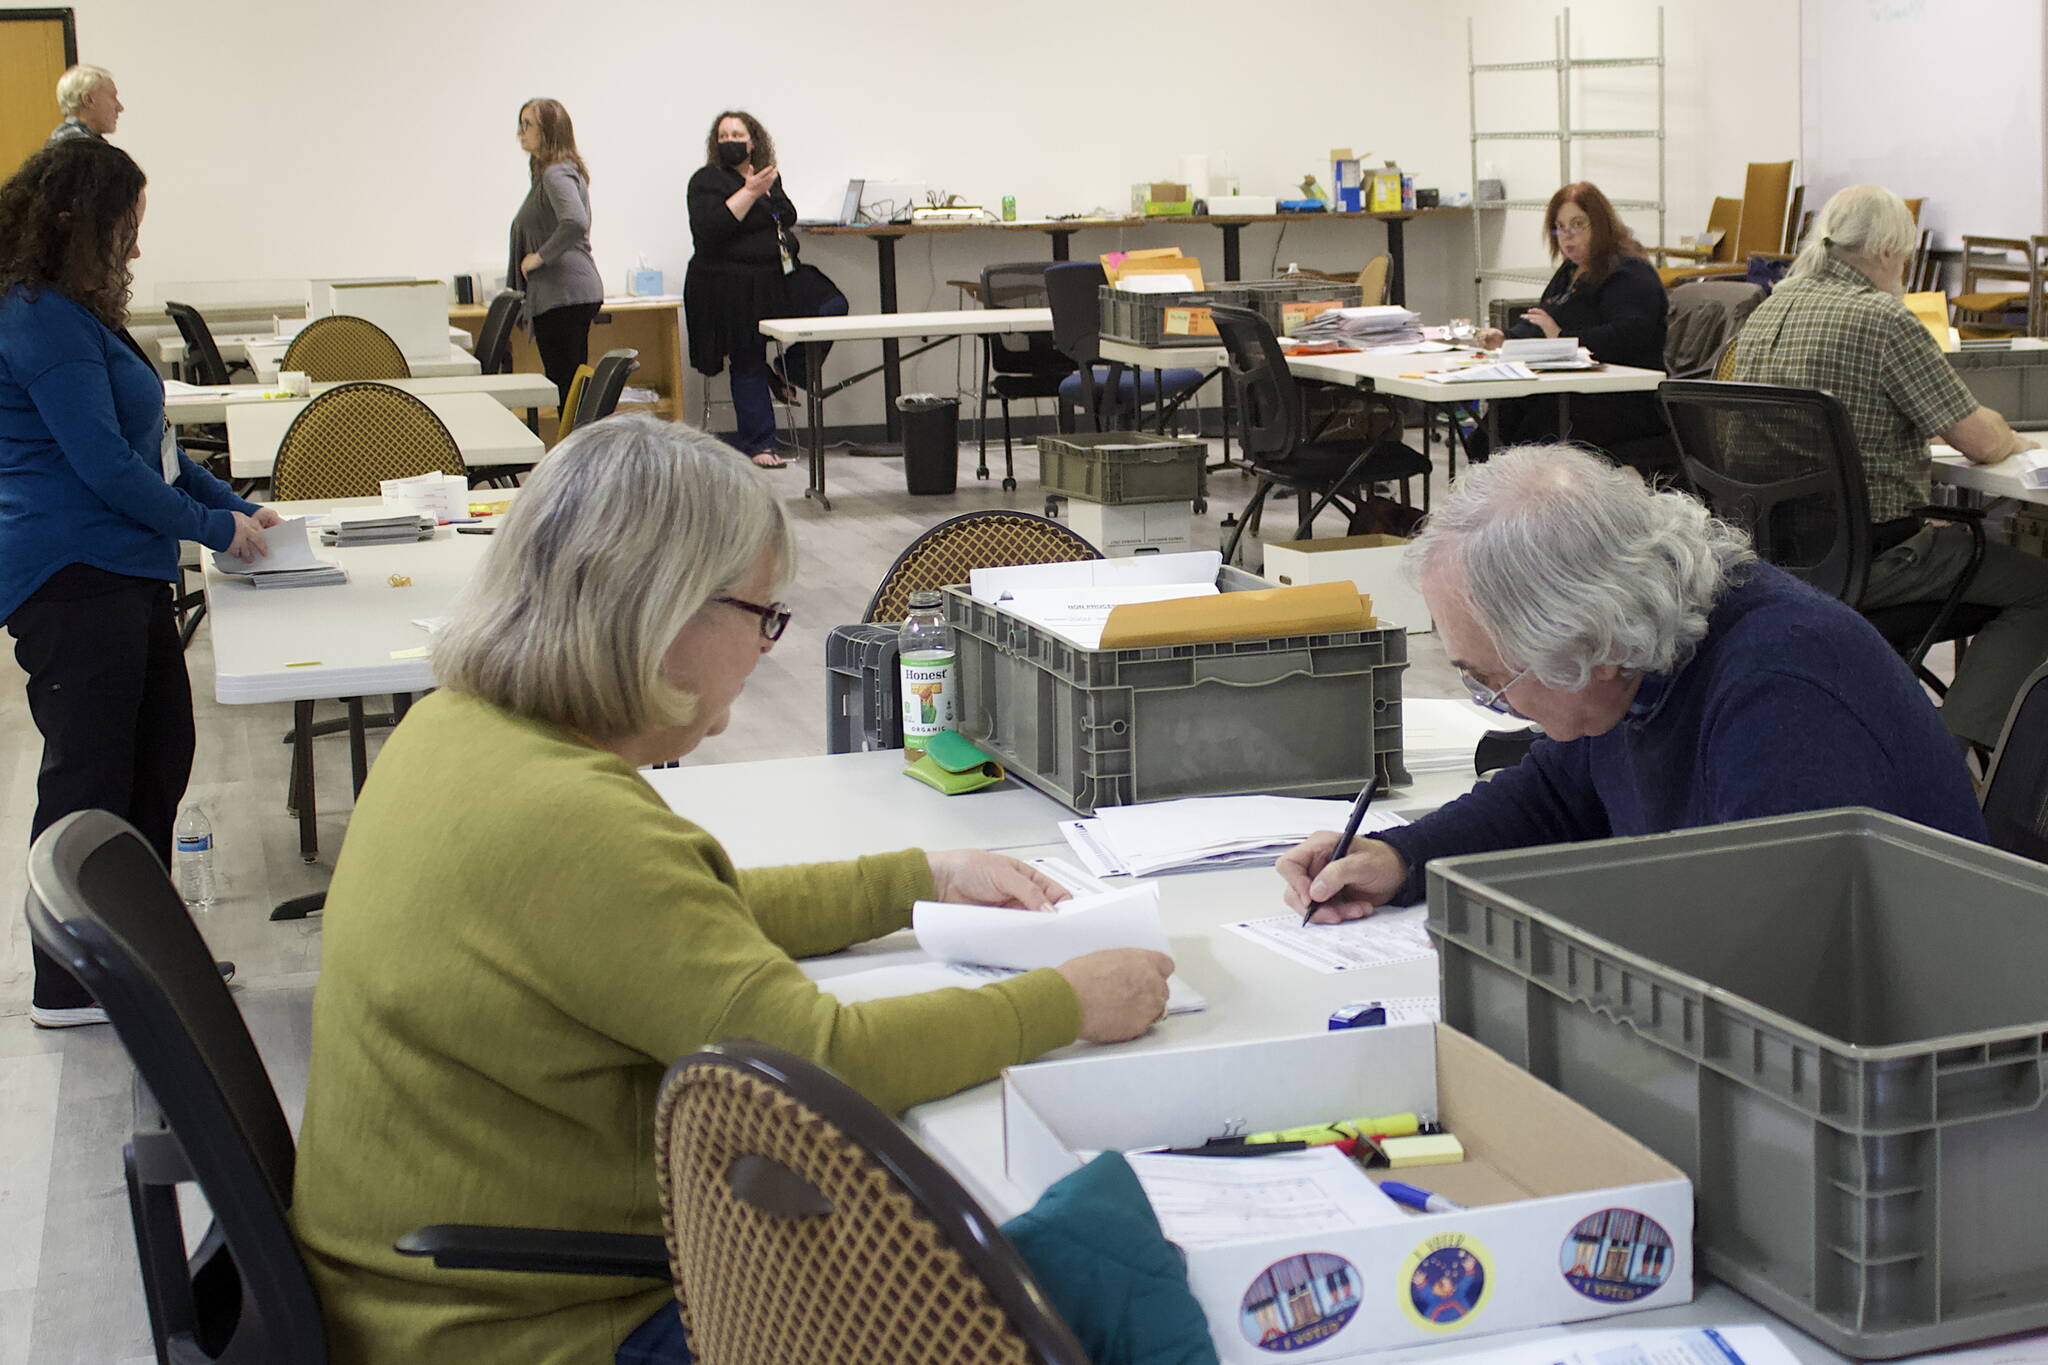 Pat Tynan, left, and Tom Melville, review absentee ballots Tuesday at the Division of Elections office at the Mendenhall Mall. The review process is taking place in a separate room from where ballots are being tallied for the official results. (Mark Sabbatini / Juneau Empire)